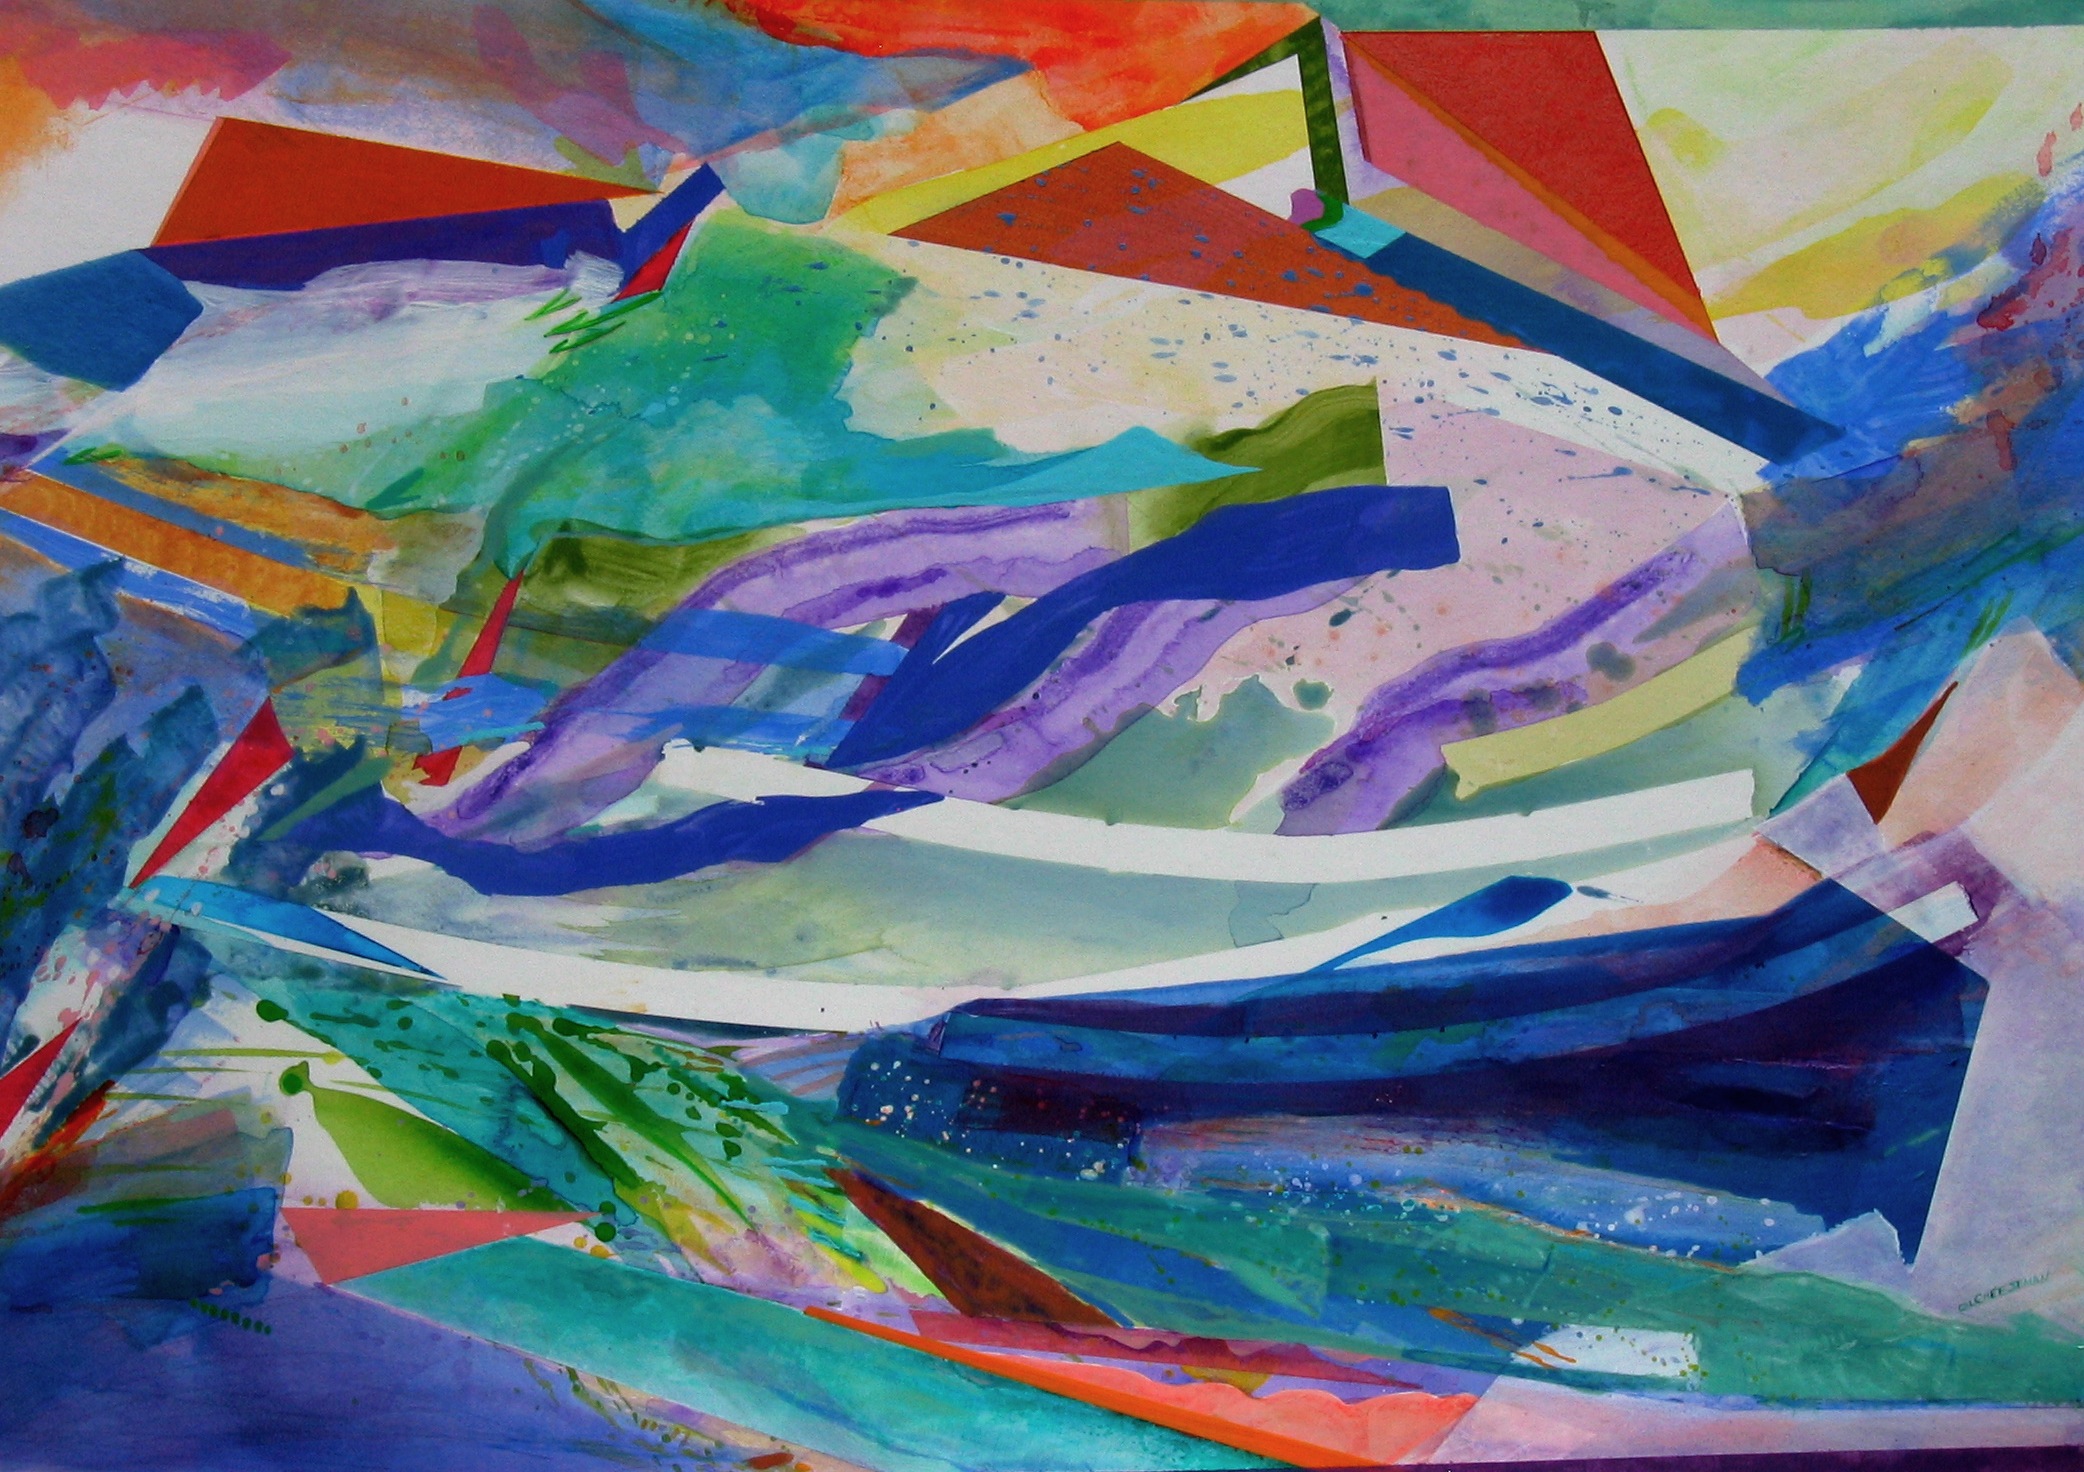 A colorful abstract painting with blues, greens, purples, and reds. There are some wavy strokes and triangular shapes in the work.